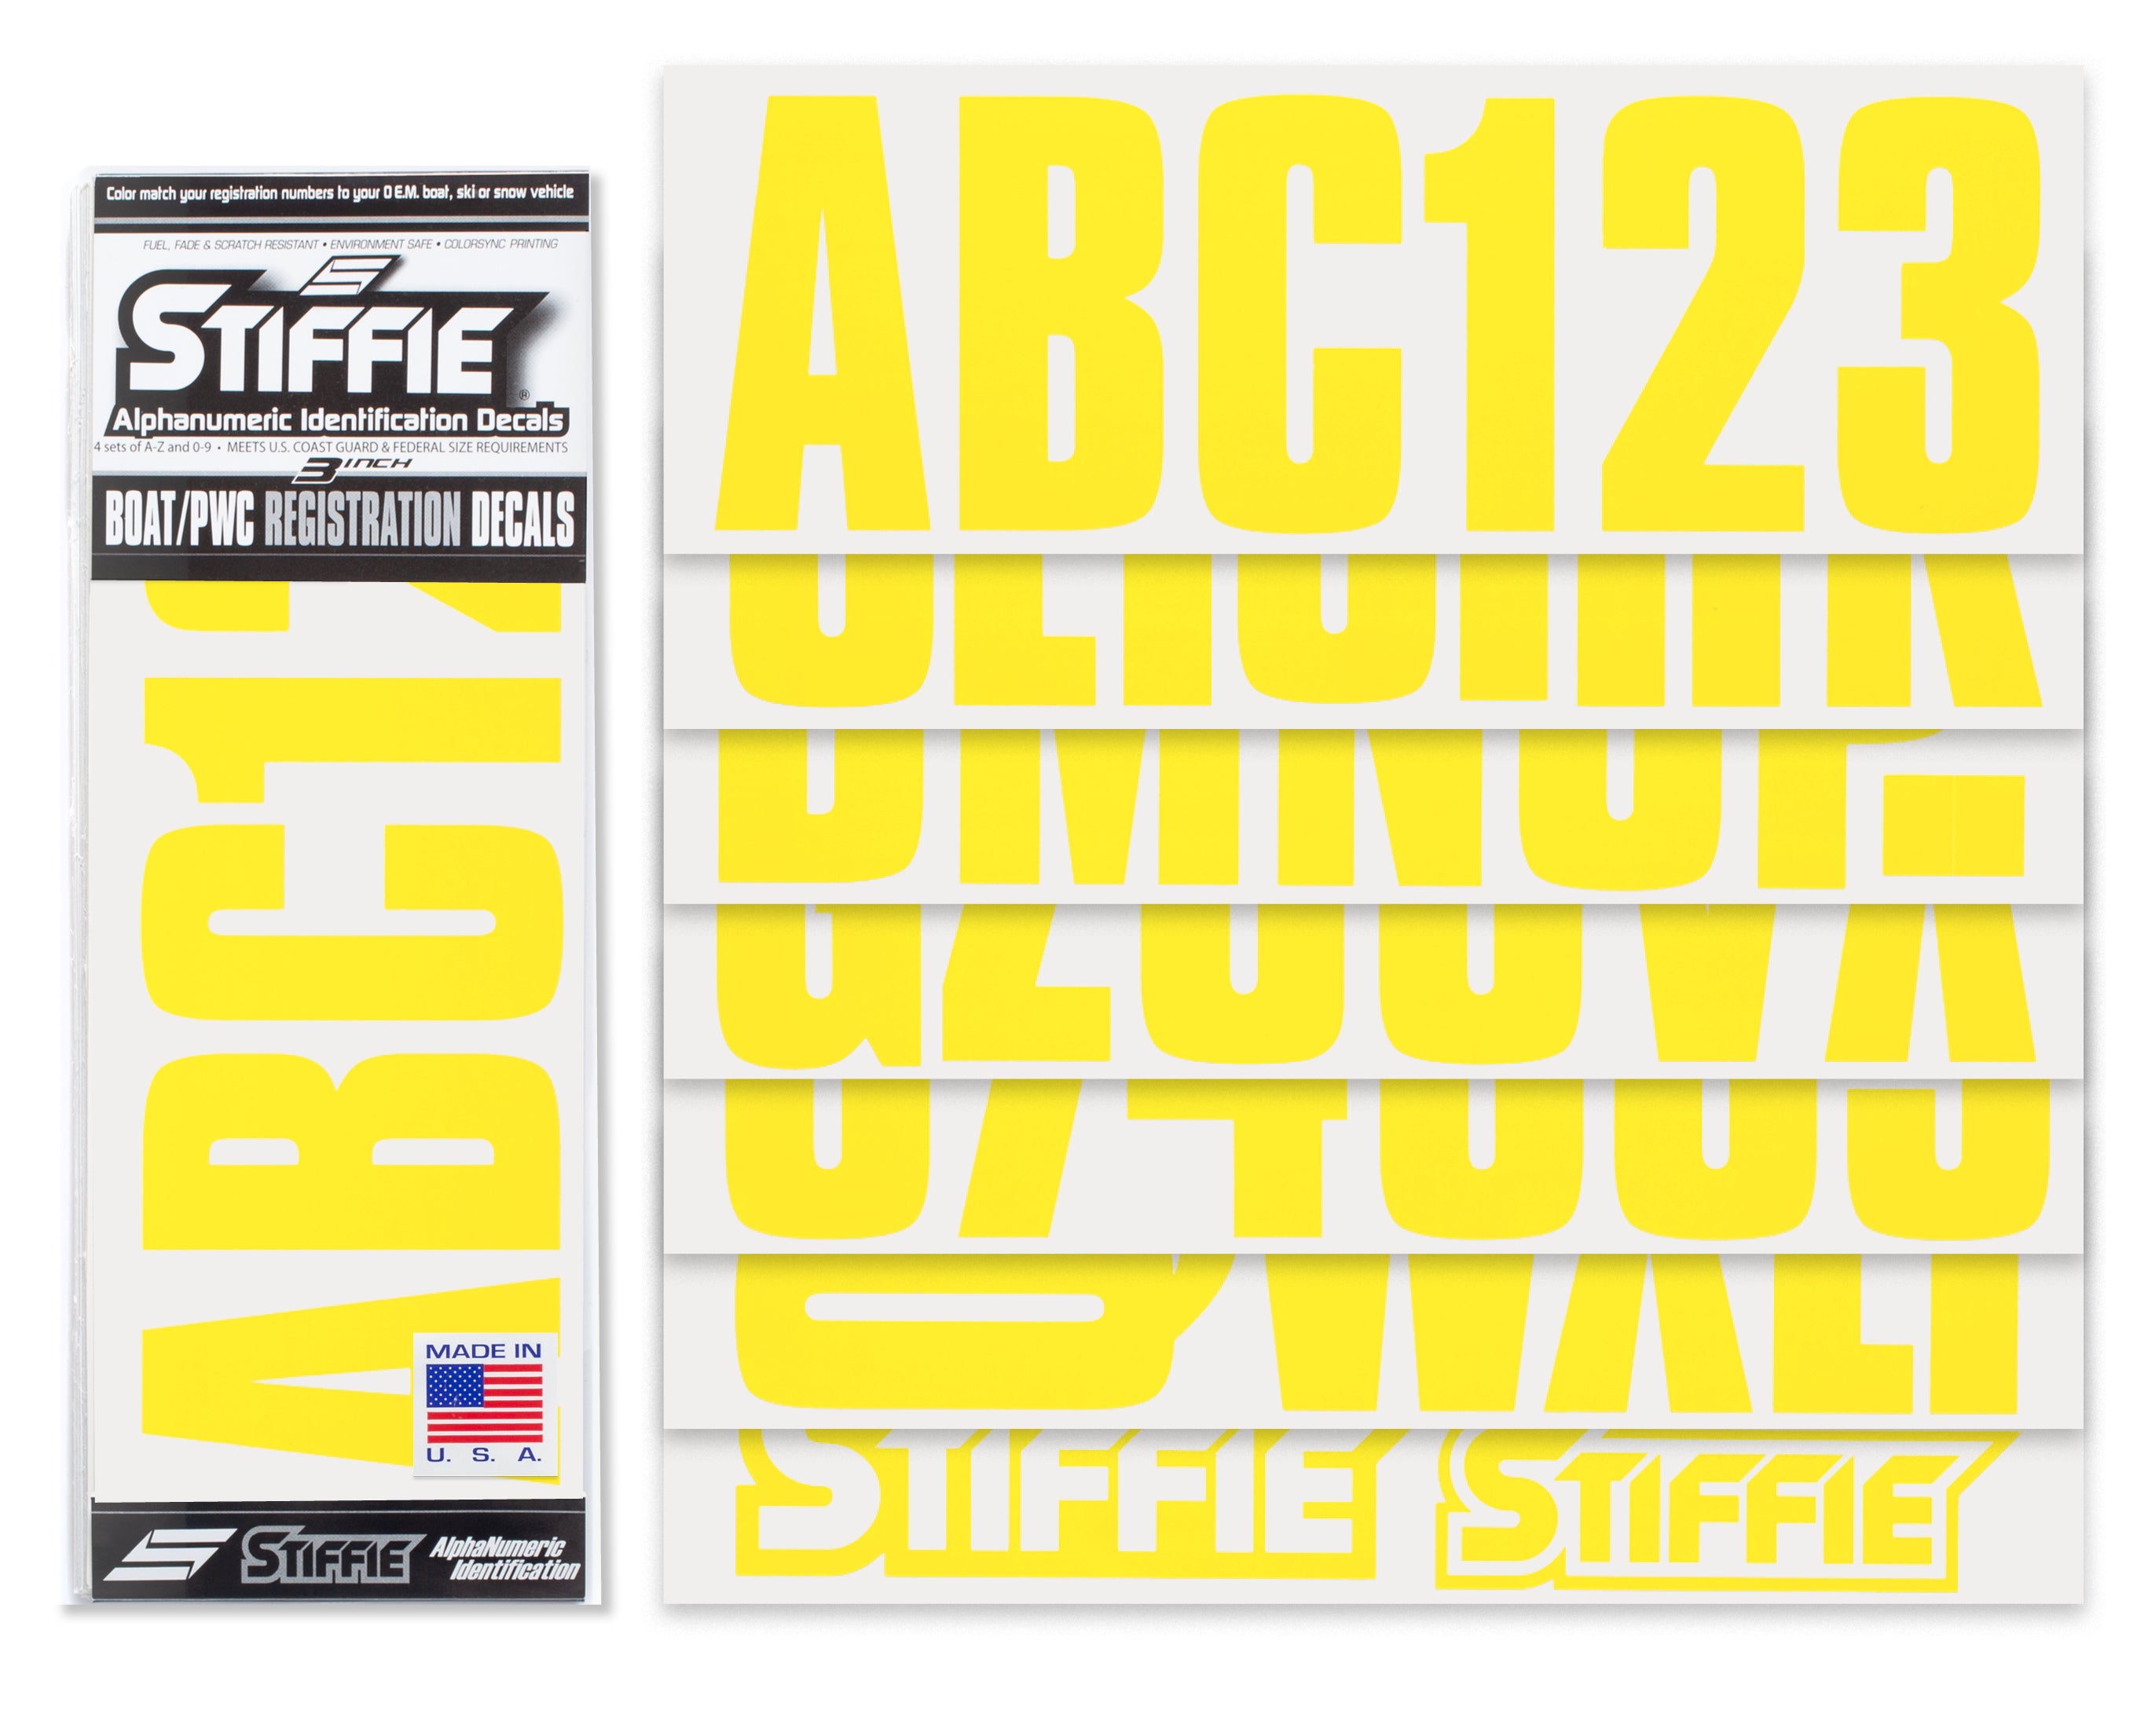 STIFFIE Uniline Electric Yellow 3" ID Kit Alpha-Numeric Registration Identification Numbers Stickers Decals for Boats & Personal Watercraft